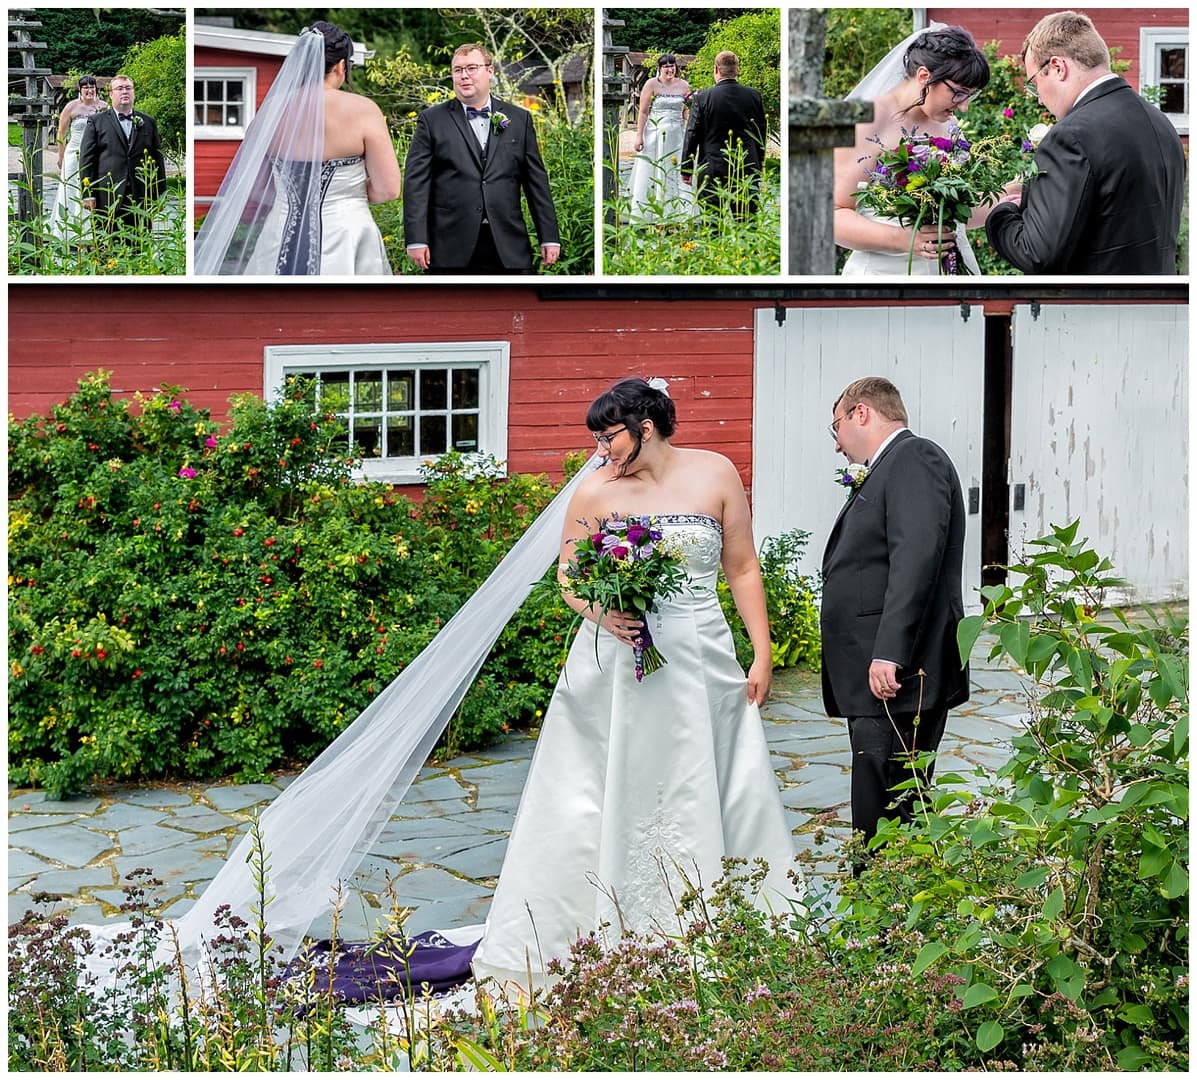 The bride and groom have their first look before their wedding reception at the Hubbard's Barn in Nova Scotia.